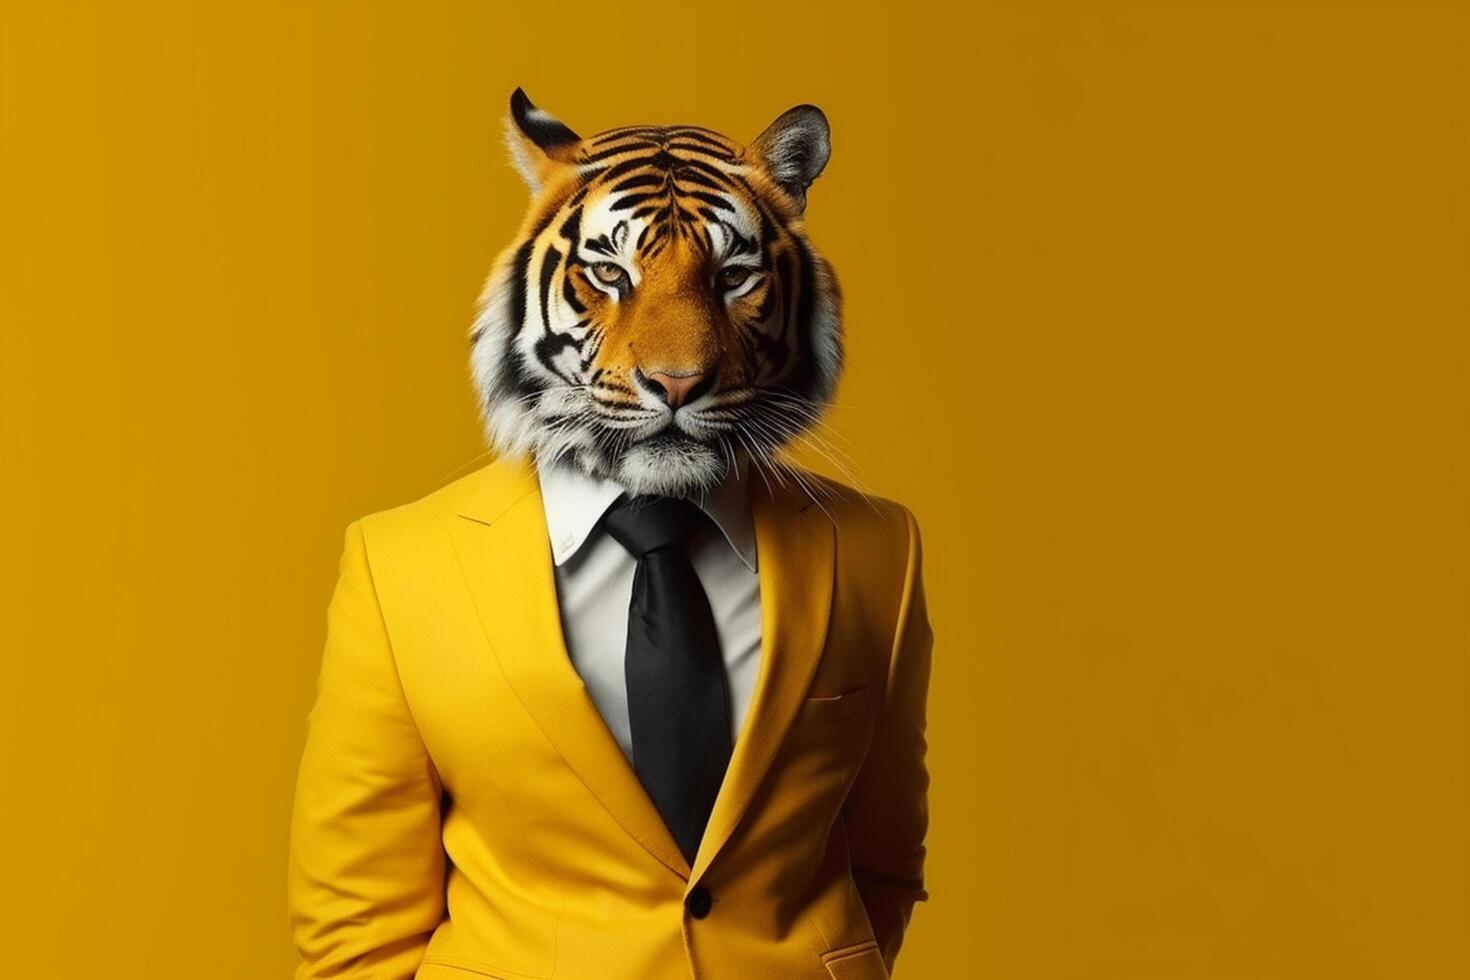 Portrait of a tiger in a business suit on a isolated background photo